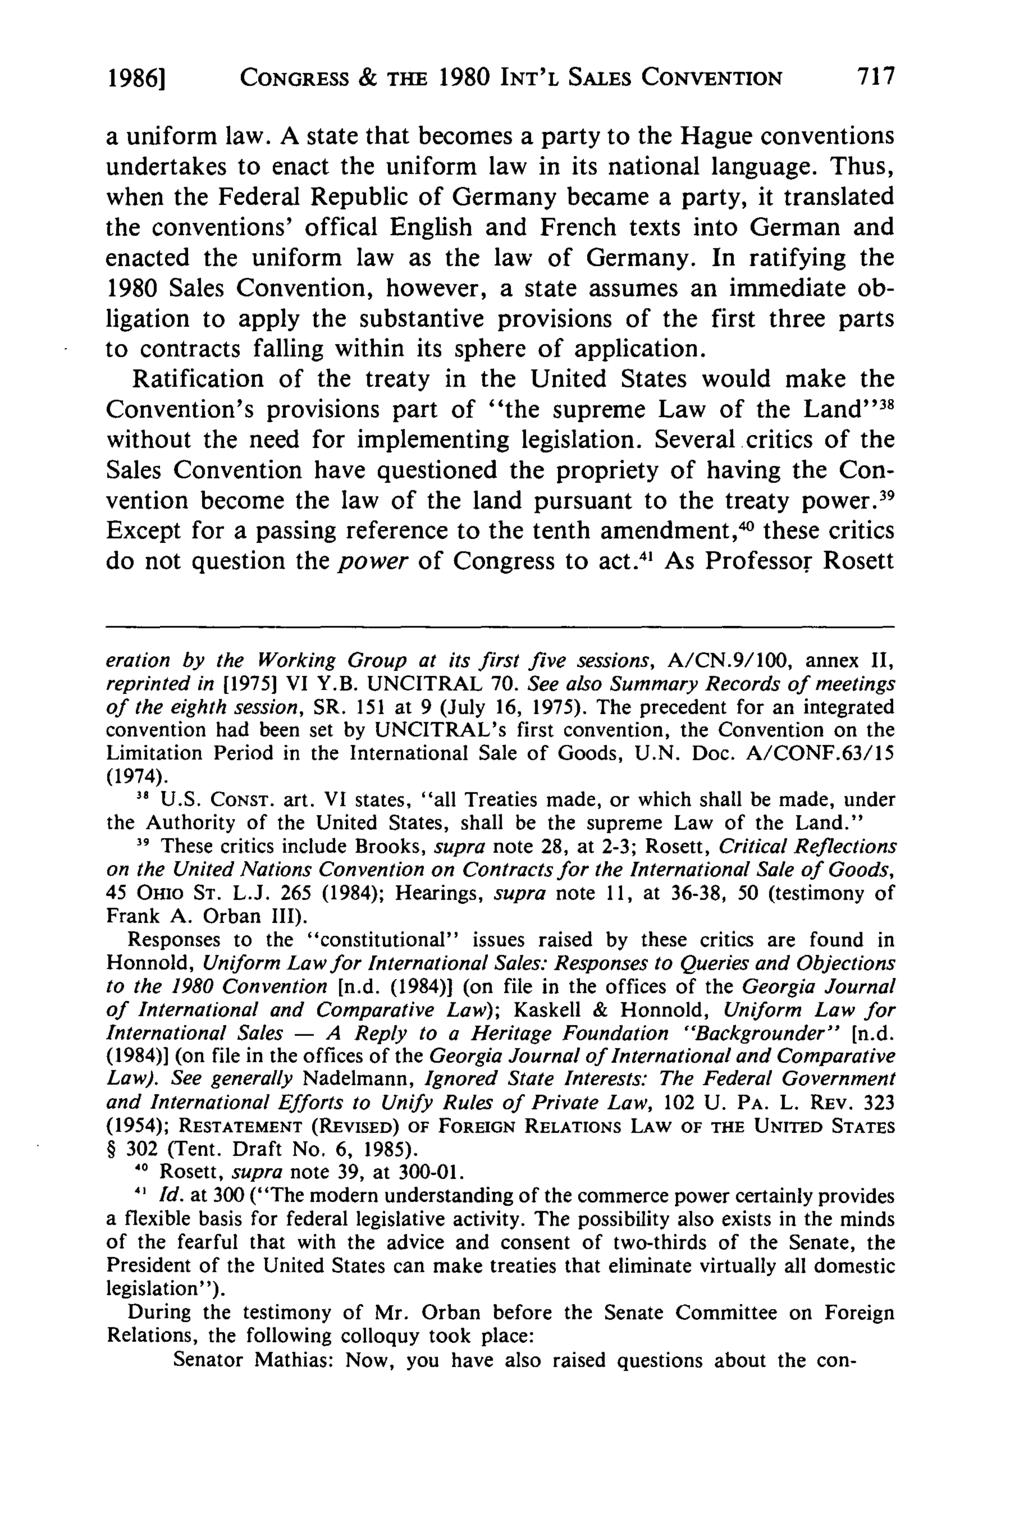 1986] CONGRESS & THE 1980 INT'L SALES CONVENTION a uniform law. A state that becomes a party to the Hague conventions undertakes to enact the uniform law in its national language.